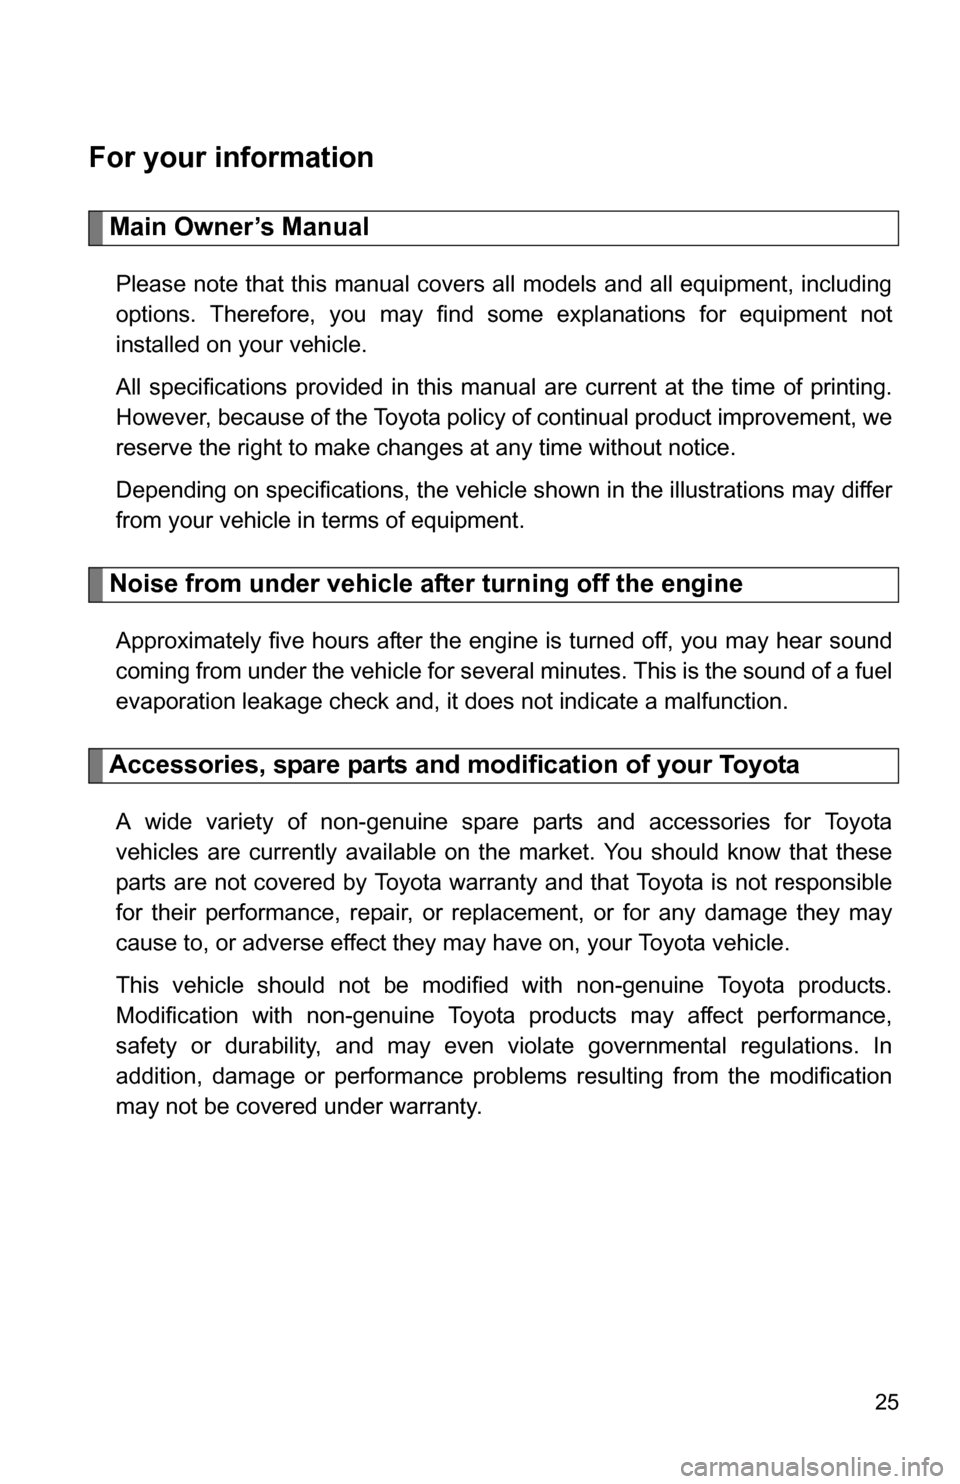 TOYOTA HIGHLANDER 2013 XU50 / 3.G Owners Manual 25
For your information
Main Owner’s Manual
Please note that this manual covers all models and all equipment, including
options. Therefore, you may find some explanations for equipment not
installed